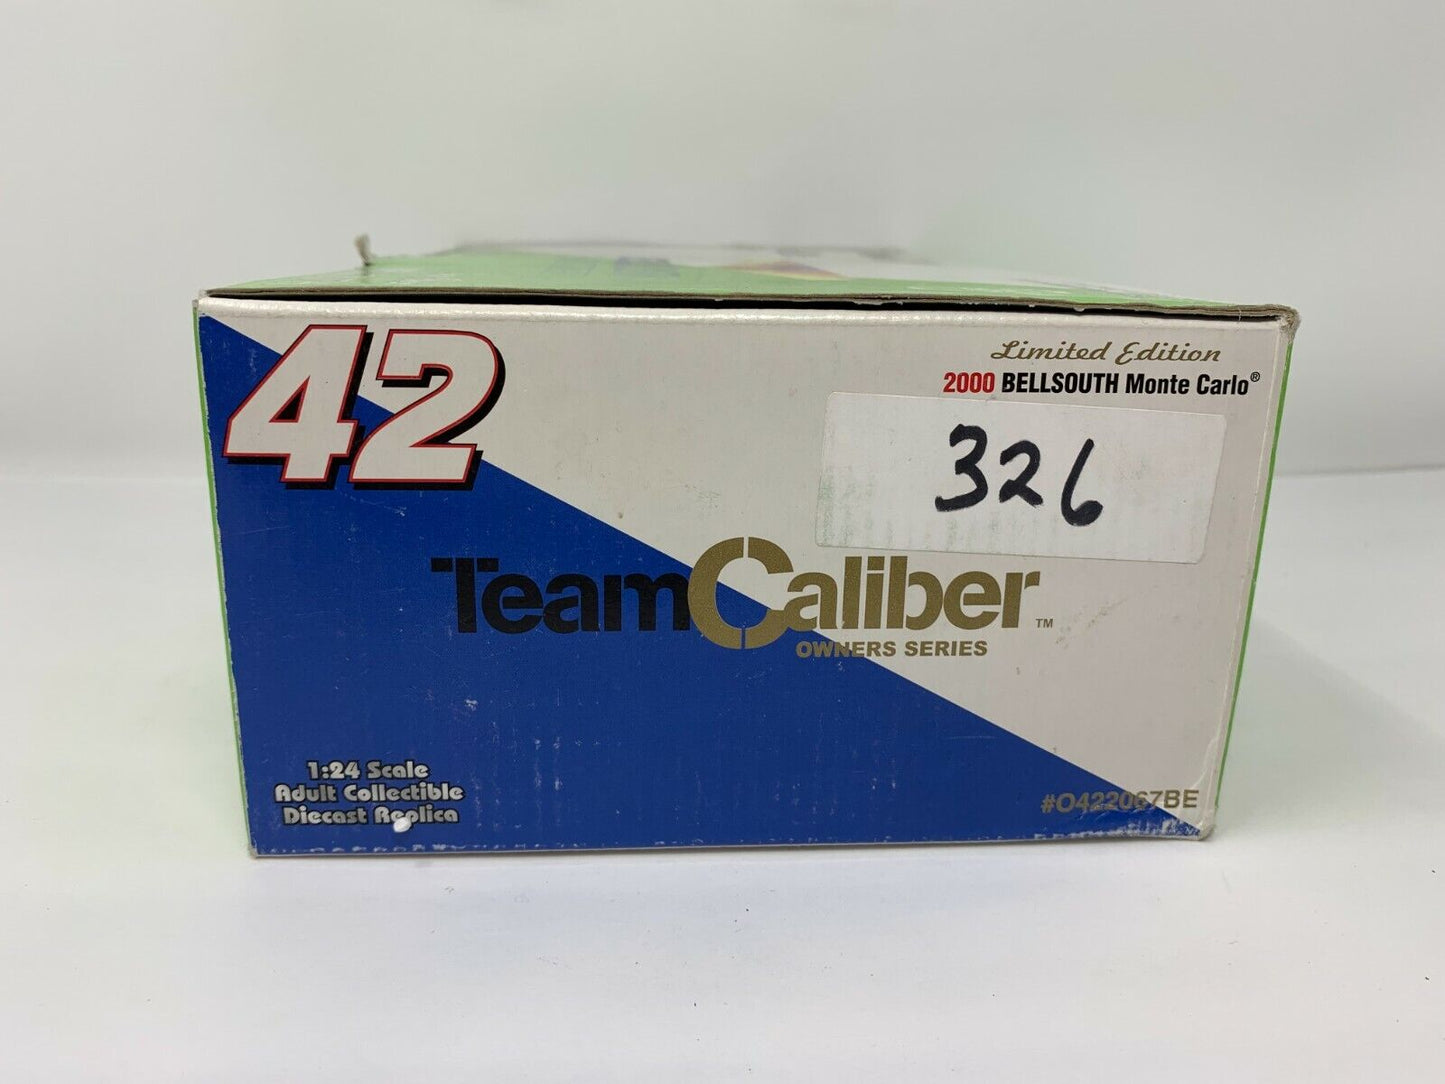 Team Caliber Owners Series Nascar Kenny Irwin BellSouth Monte Carlo 1:24 Diecast